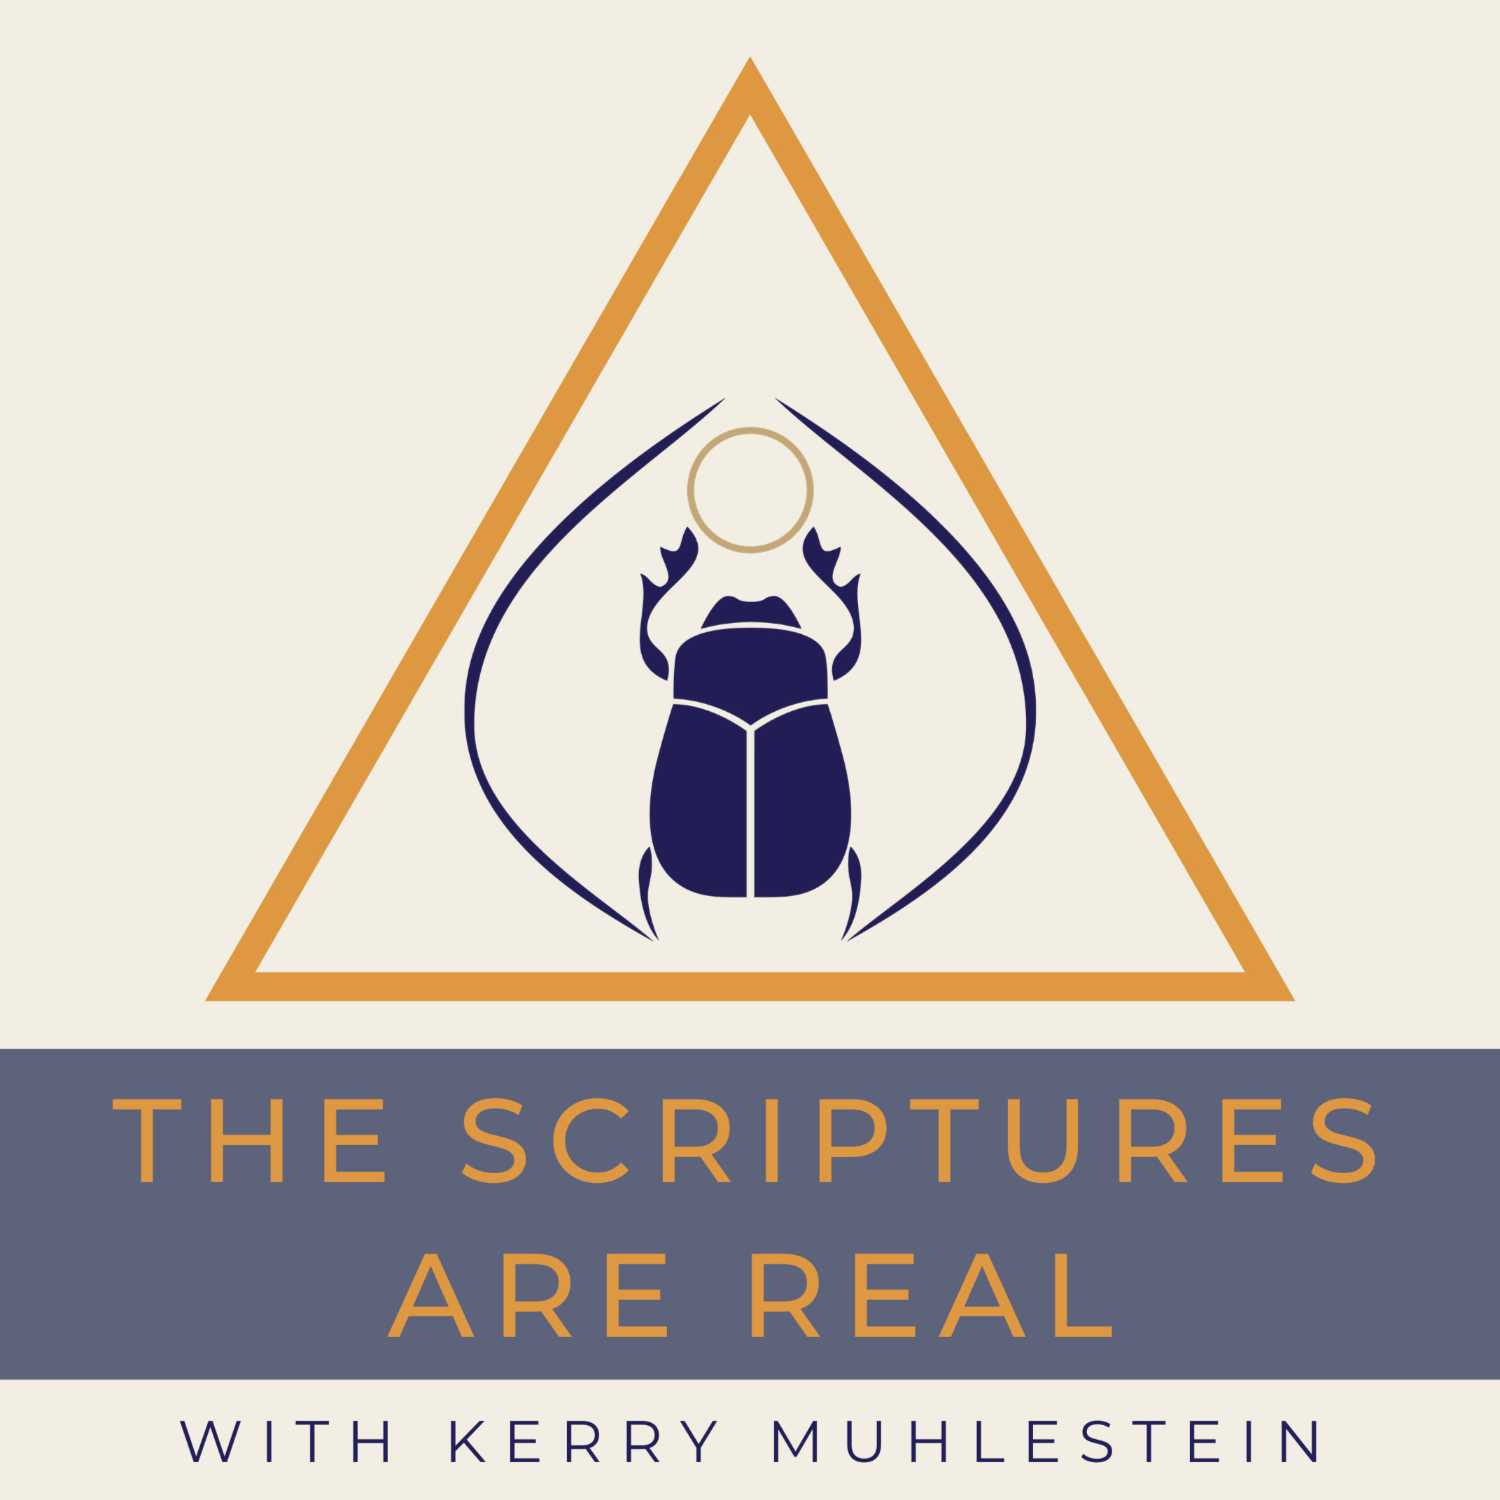 Jennifer Lane on Resurrection, Witness, and Discipleship (week of June 26, first to listen to)